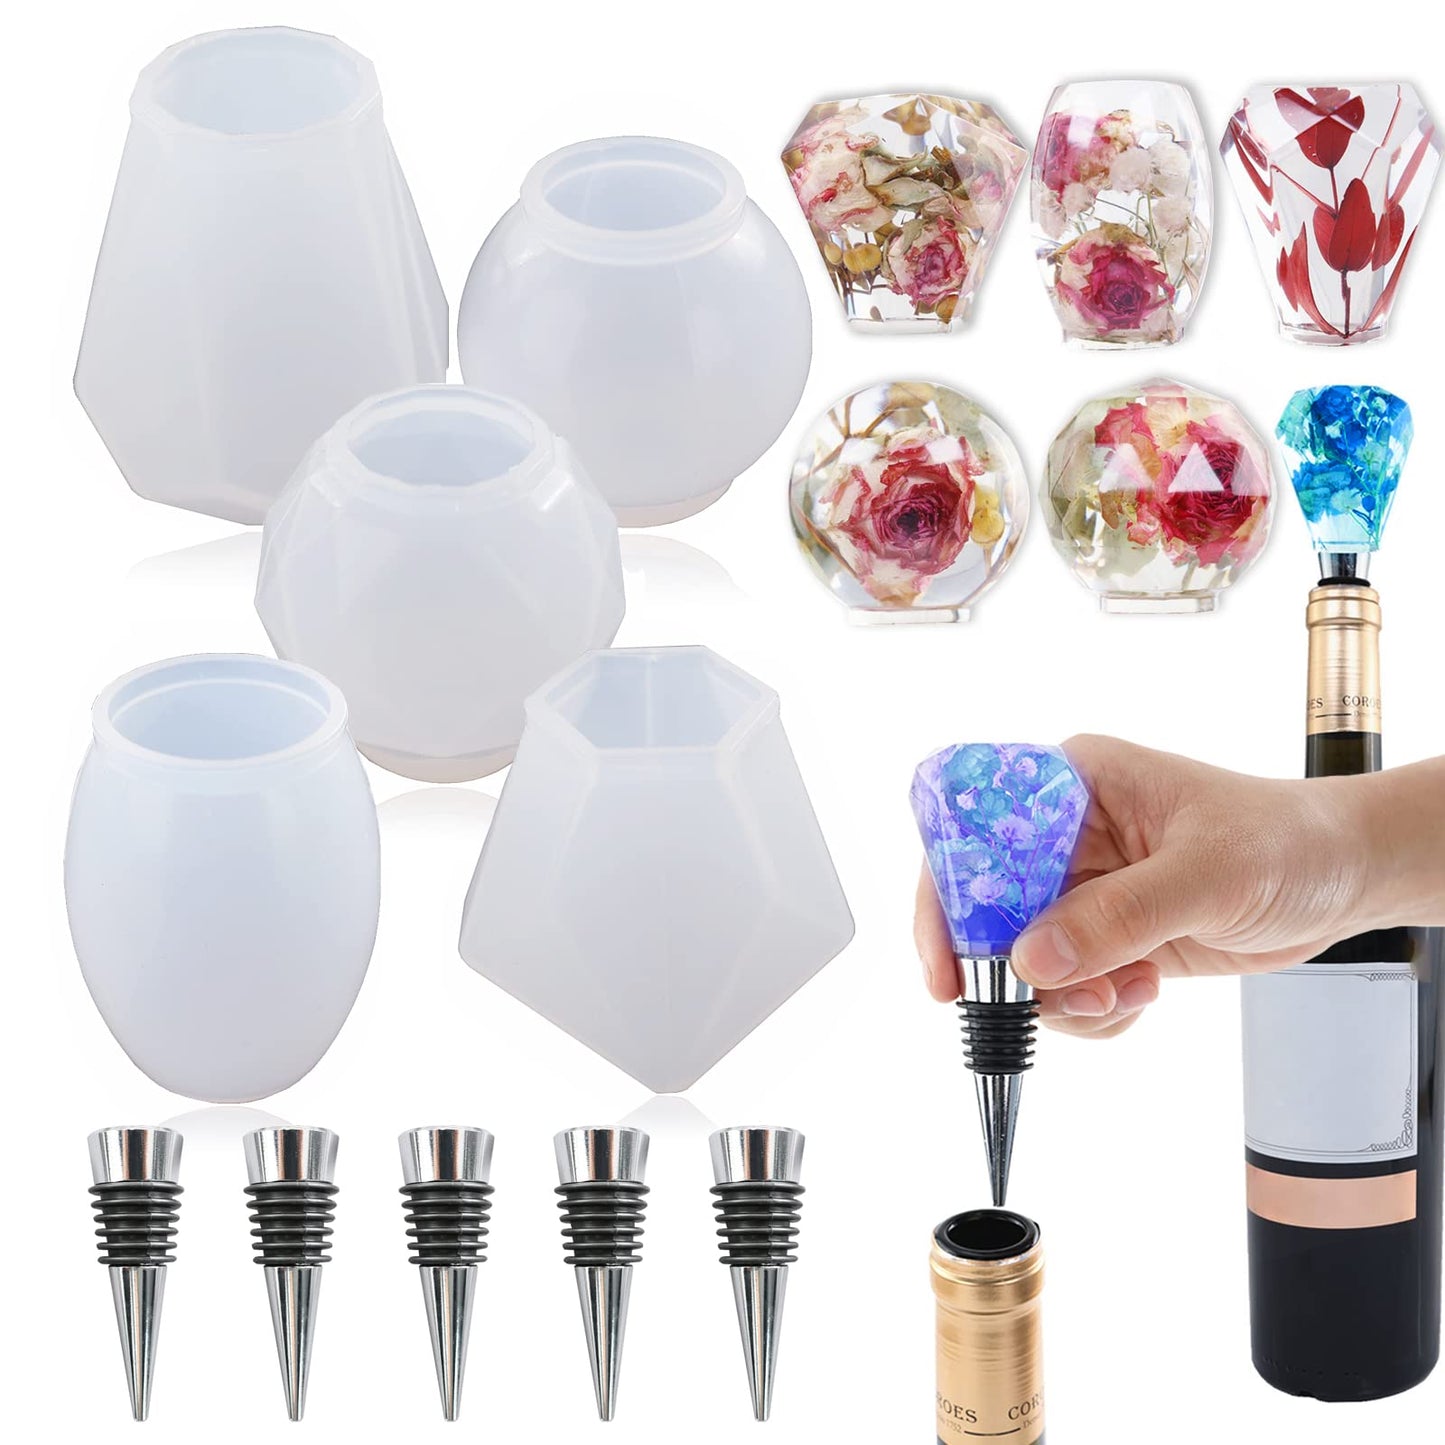 Silicone Resin Molds Set with 5PCS Wine Stoppers, 5PCS Wine Bottle Stopper Saver Mold, Crystal Gem Stone Epoxy Resin Mold, Geometric Spherical